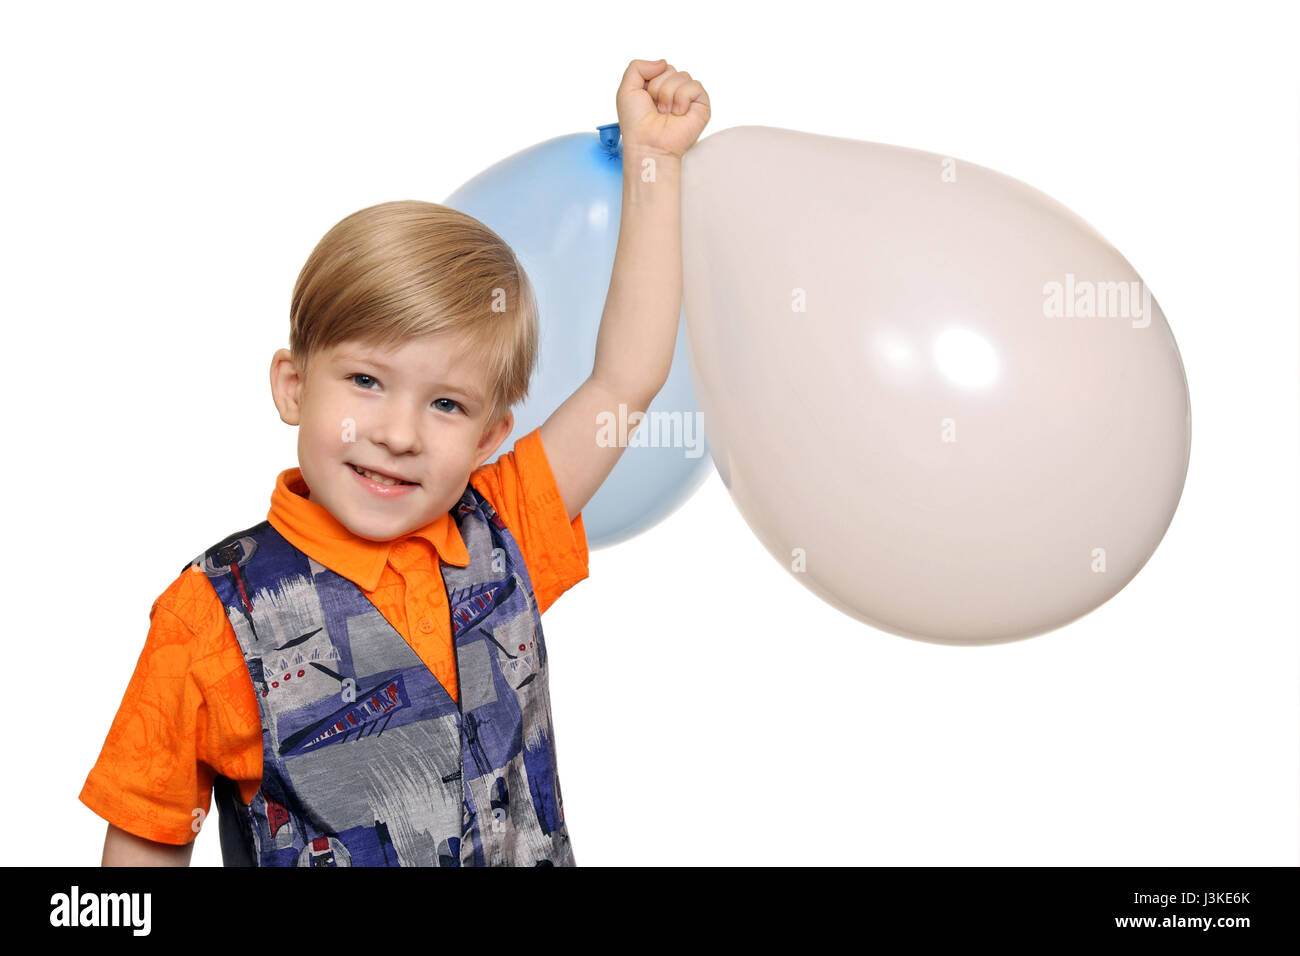 Cheerful boy with balloons, isolated on white background Stock Photo